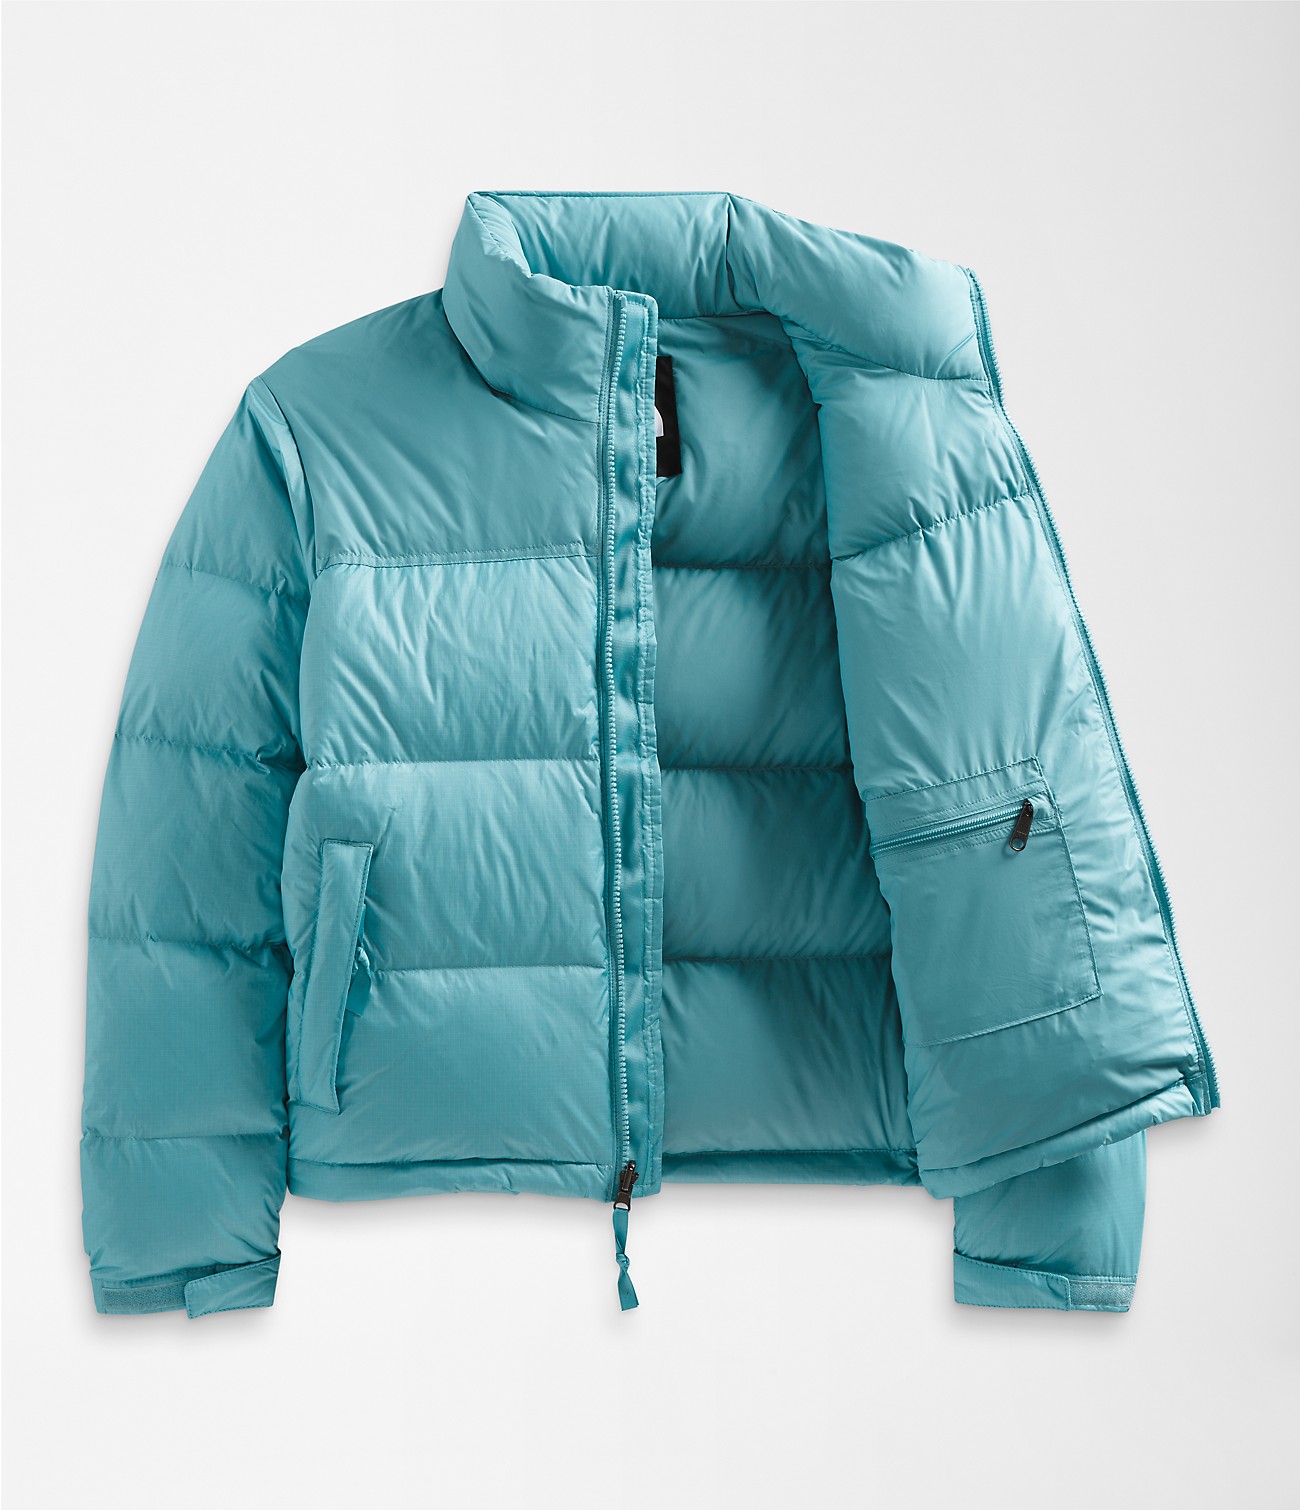 Unlock Wilderness' choice in the Patagonia Vs North Face comparison, the 1996 Retro Nuptse Jacket by The North Face